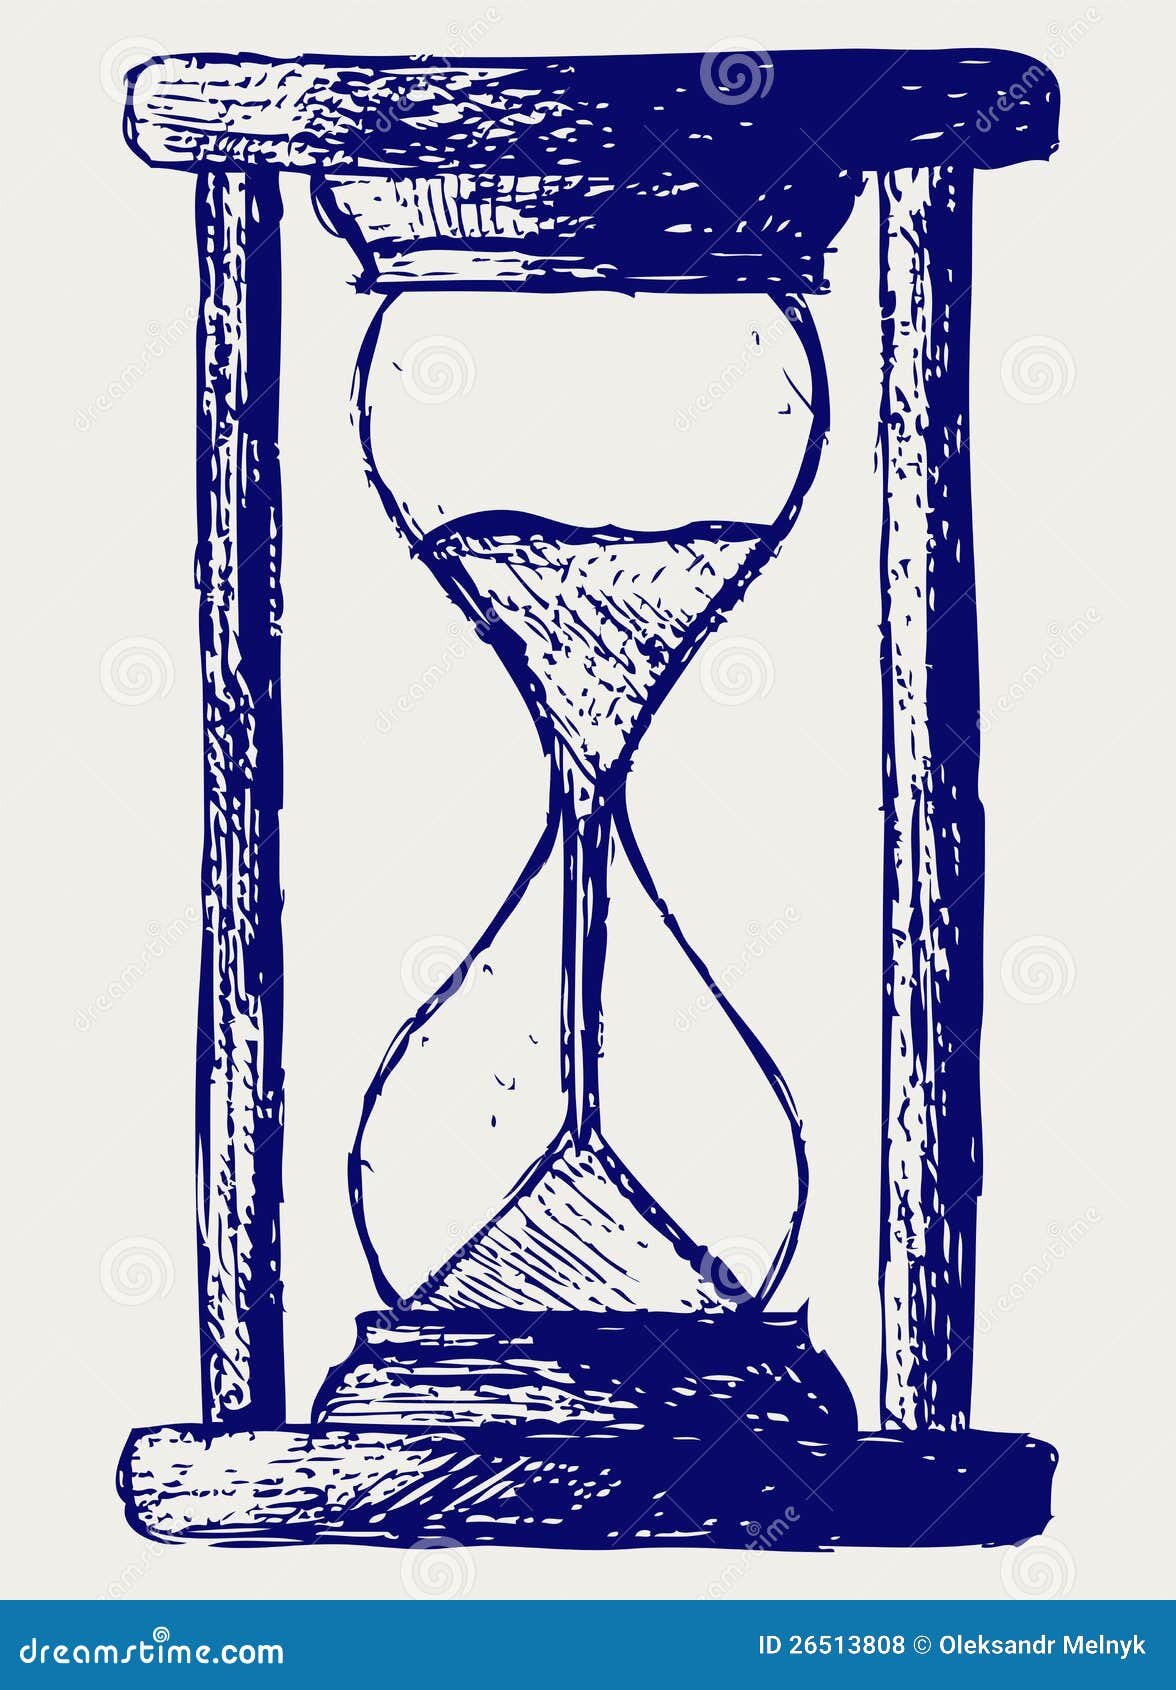 Hourglass Sketch Royalty Free Stock Photos - Image: 26513808